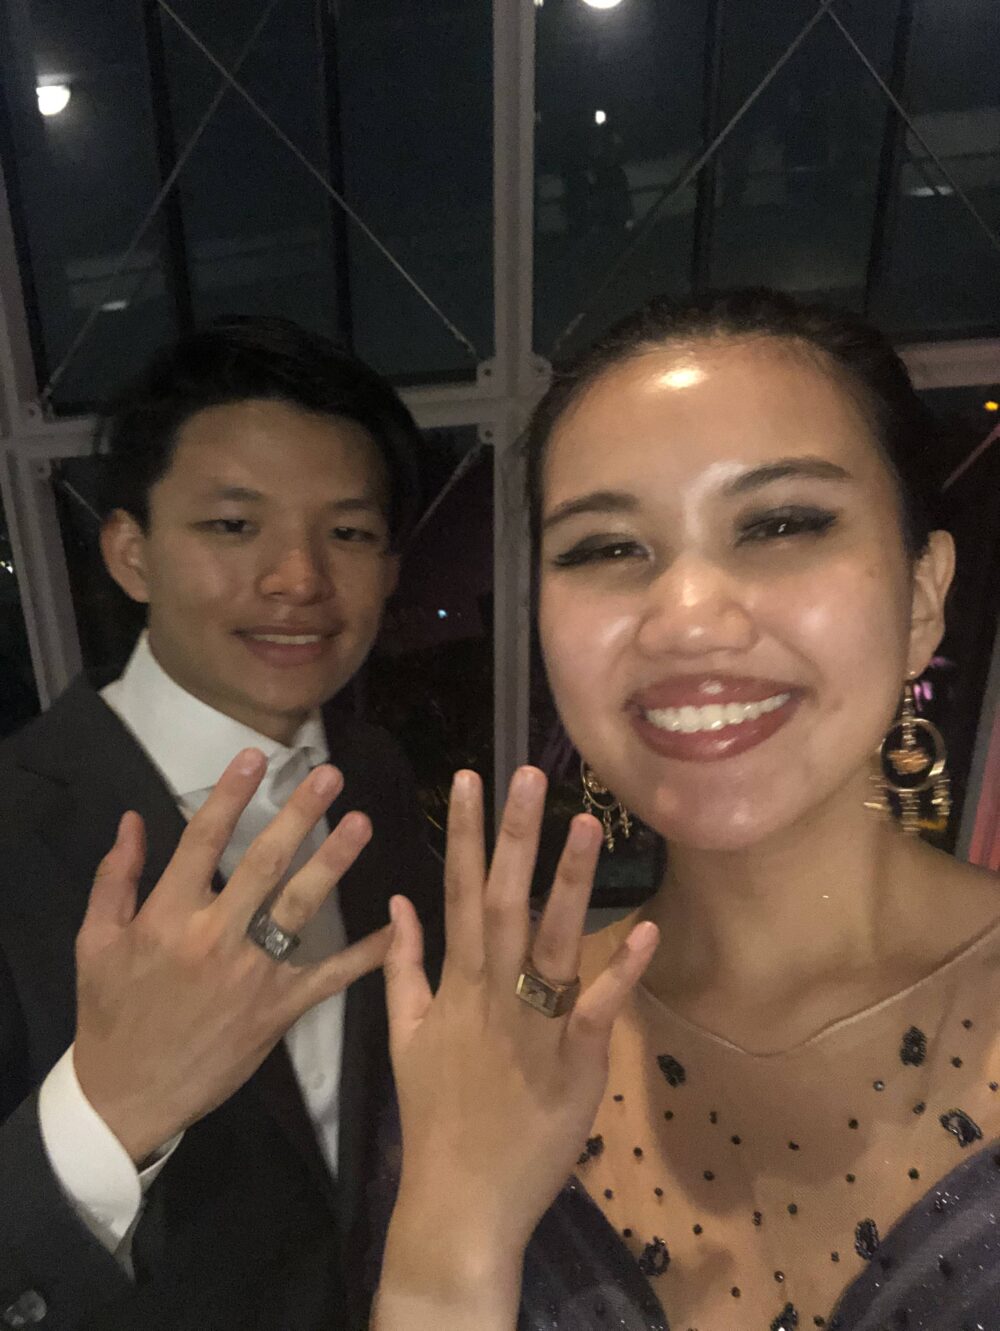 a man and woman smiling while showing off their rings